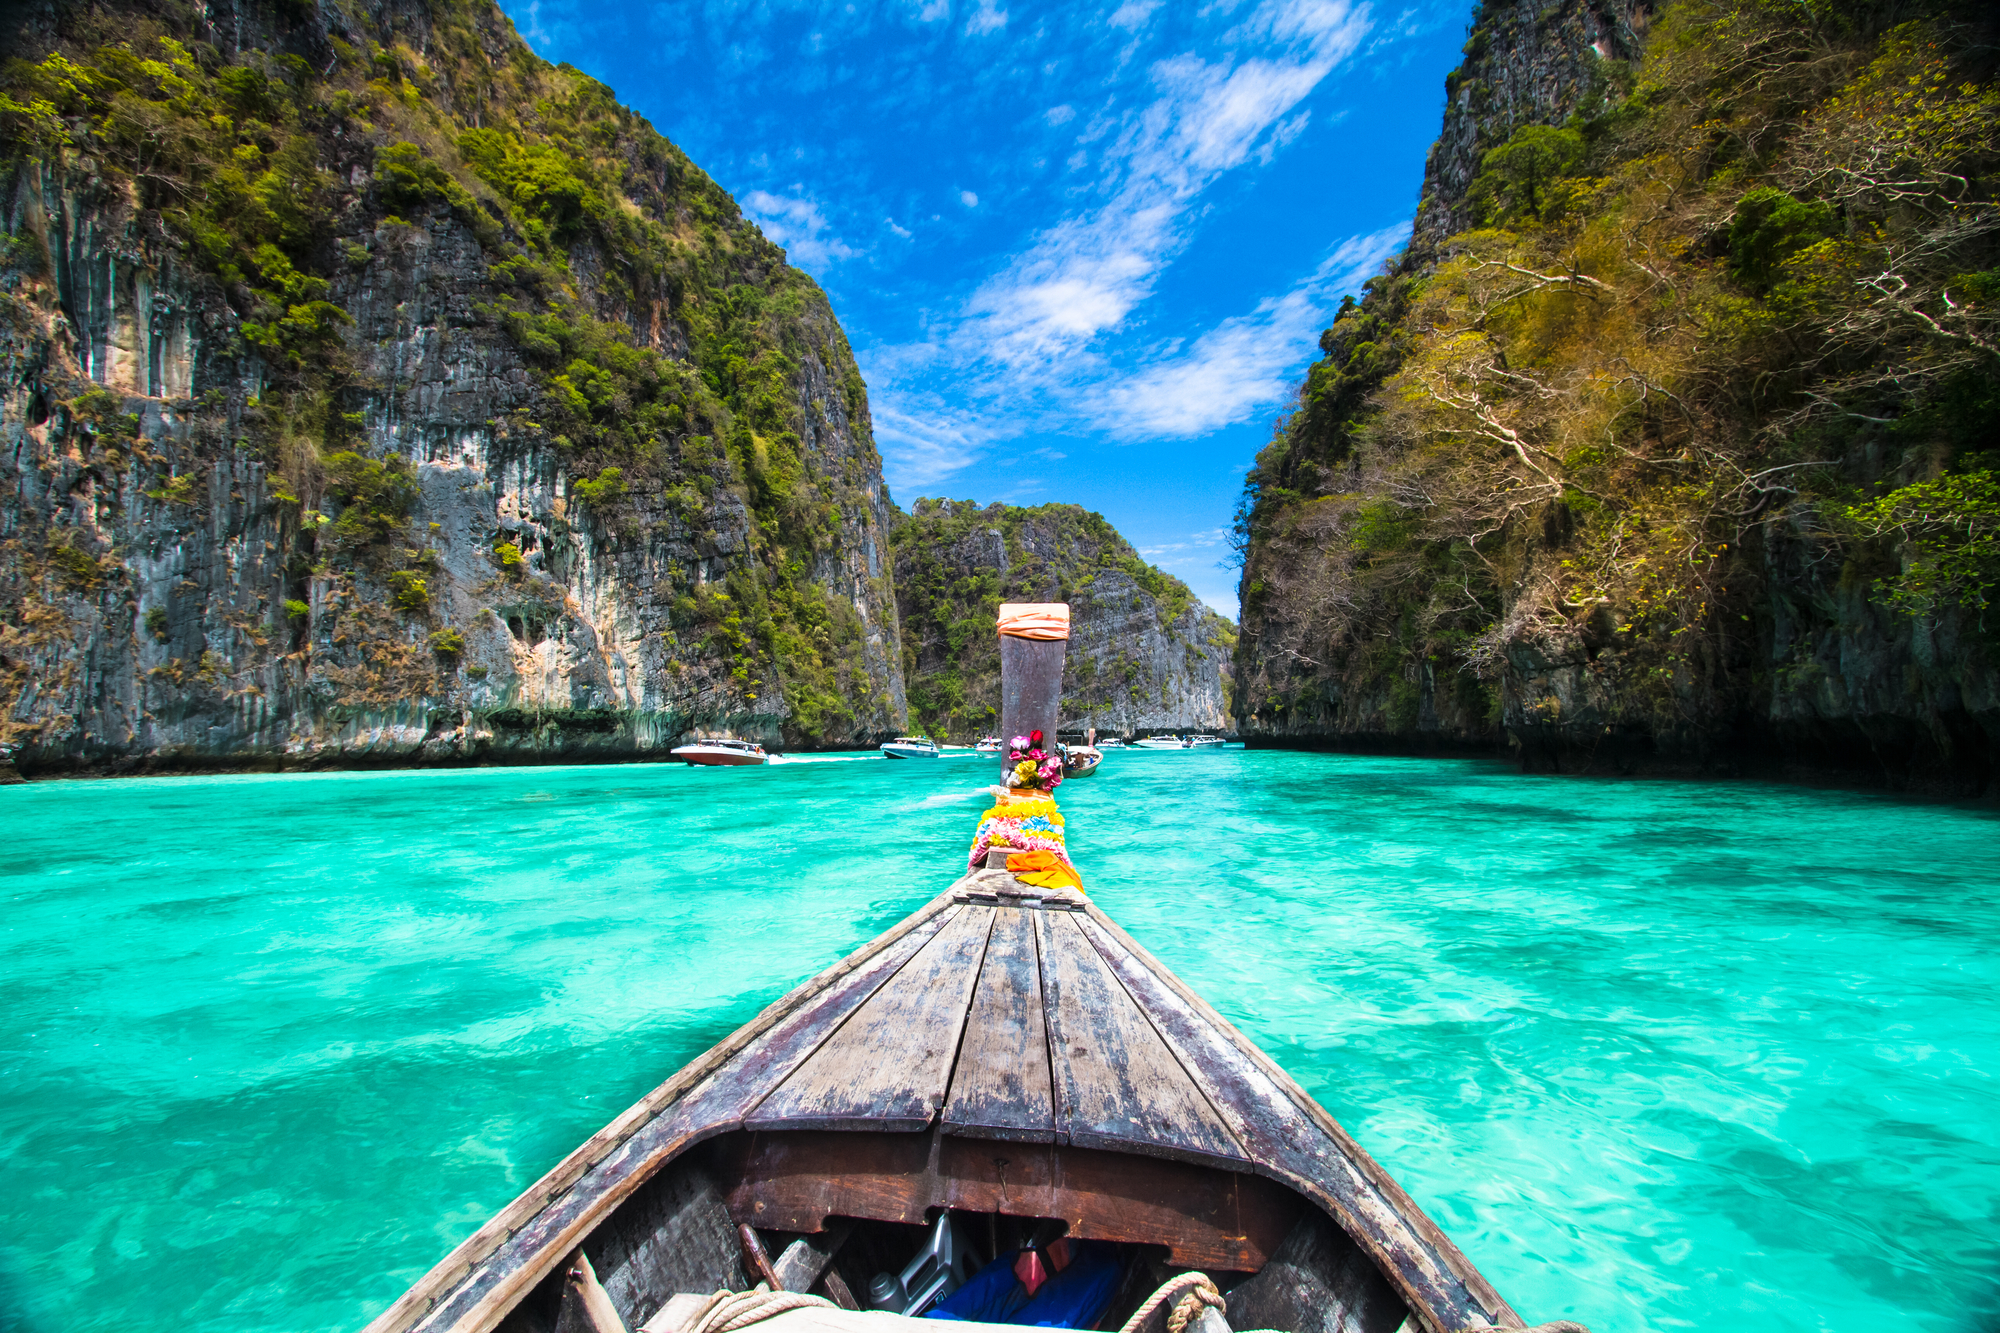 20-photos-of-thailand-that-ll-make-you-want-to-pack-your-bags-and-go